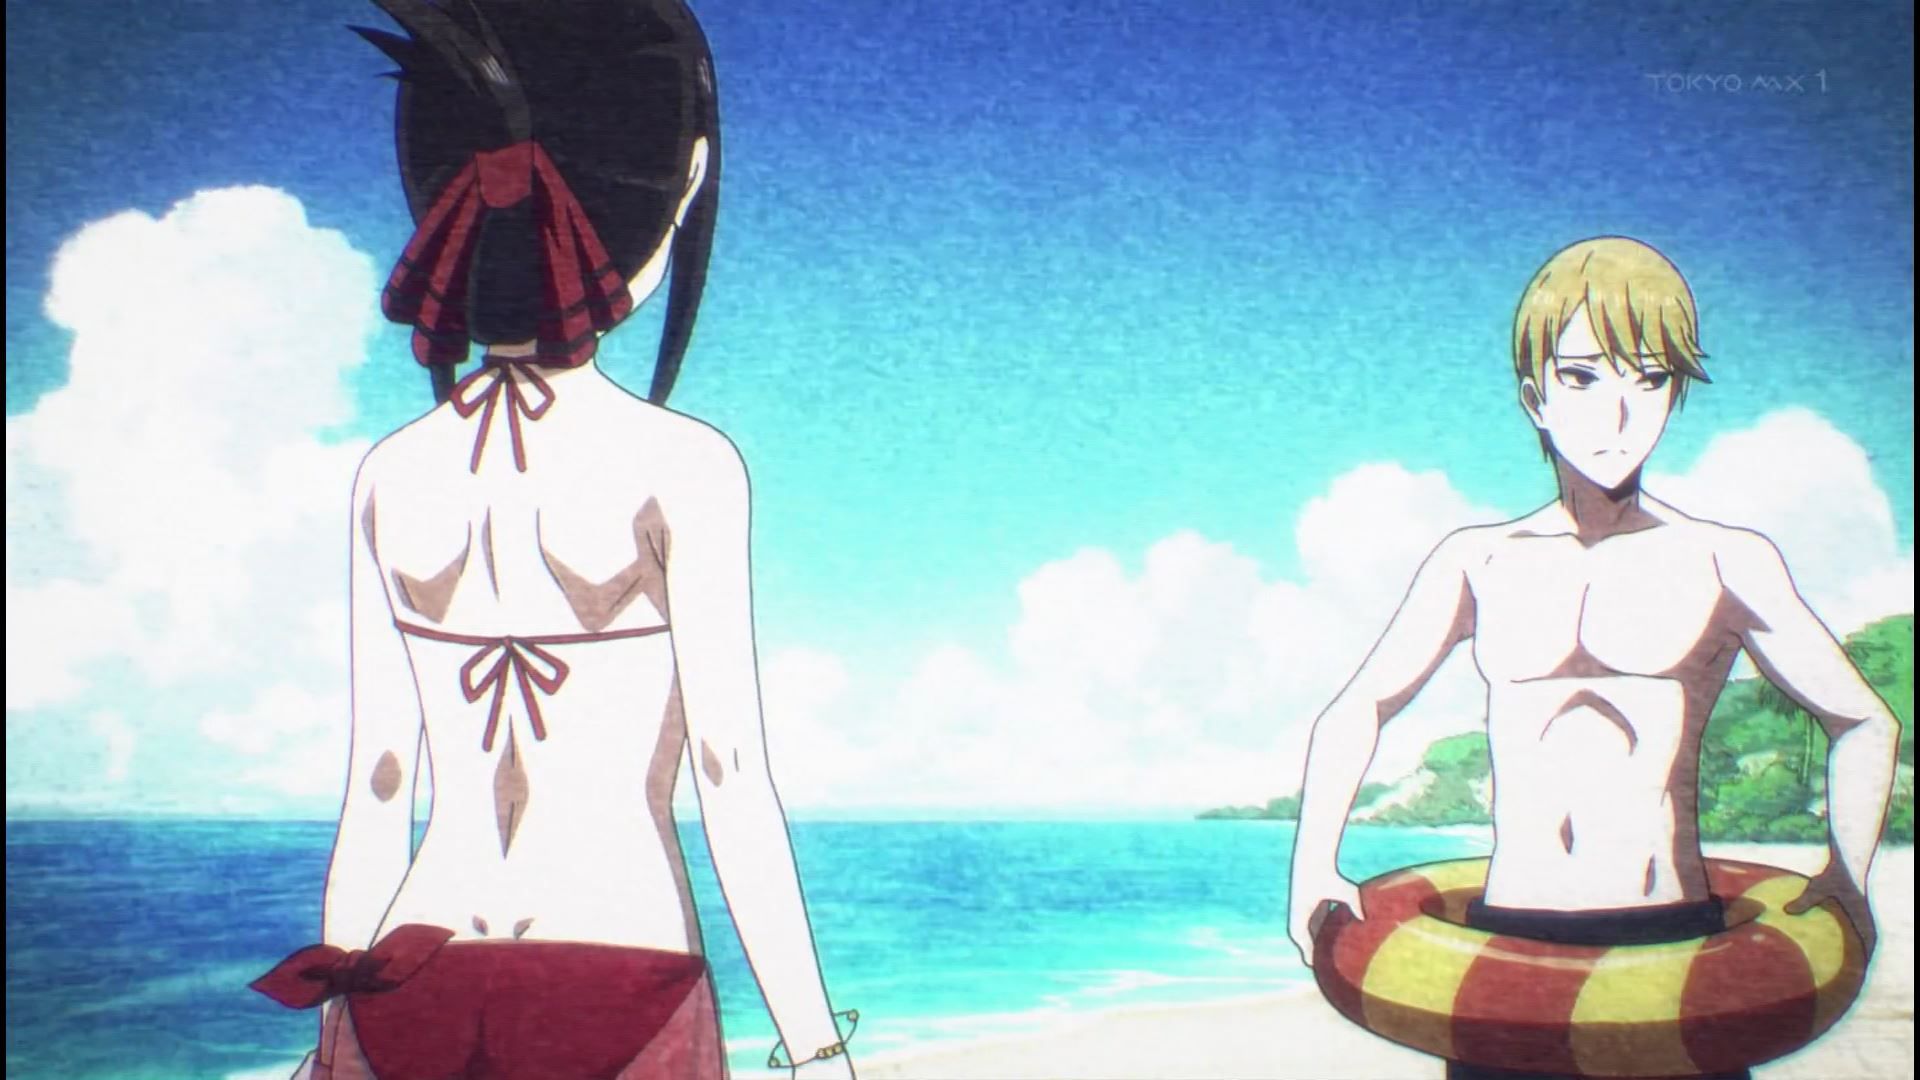 Anime [Kaguya want to be heard] 2 in the story of a girl erotic Pettanko swimsuit and breasts! 8